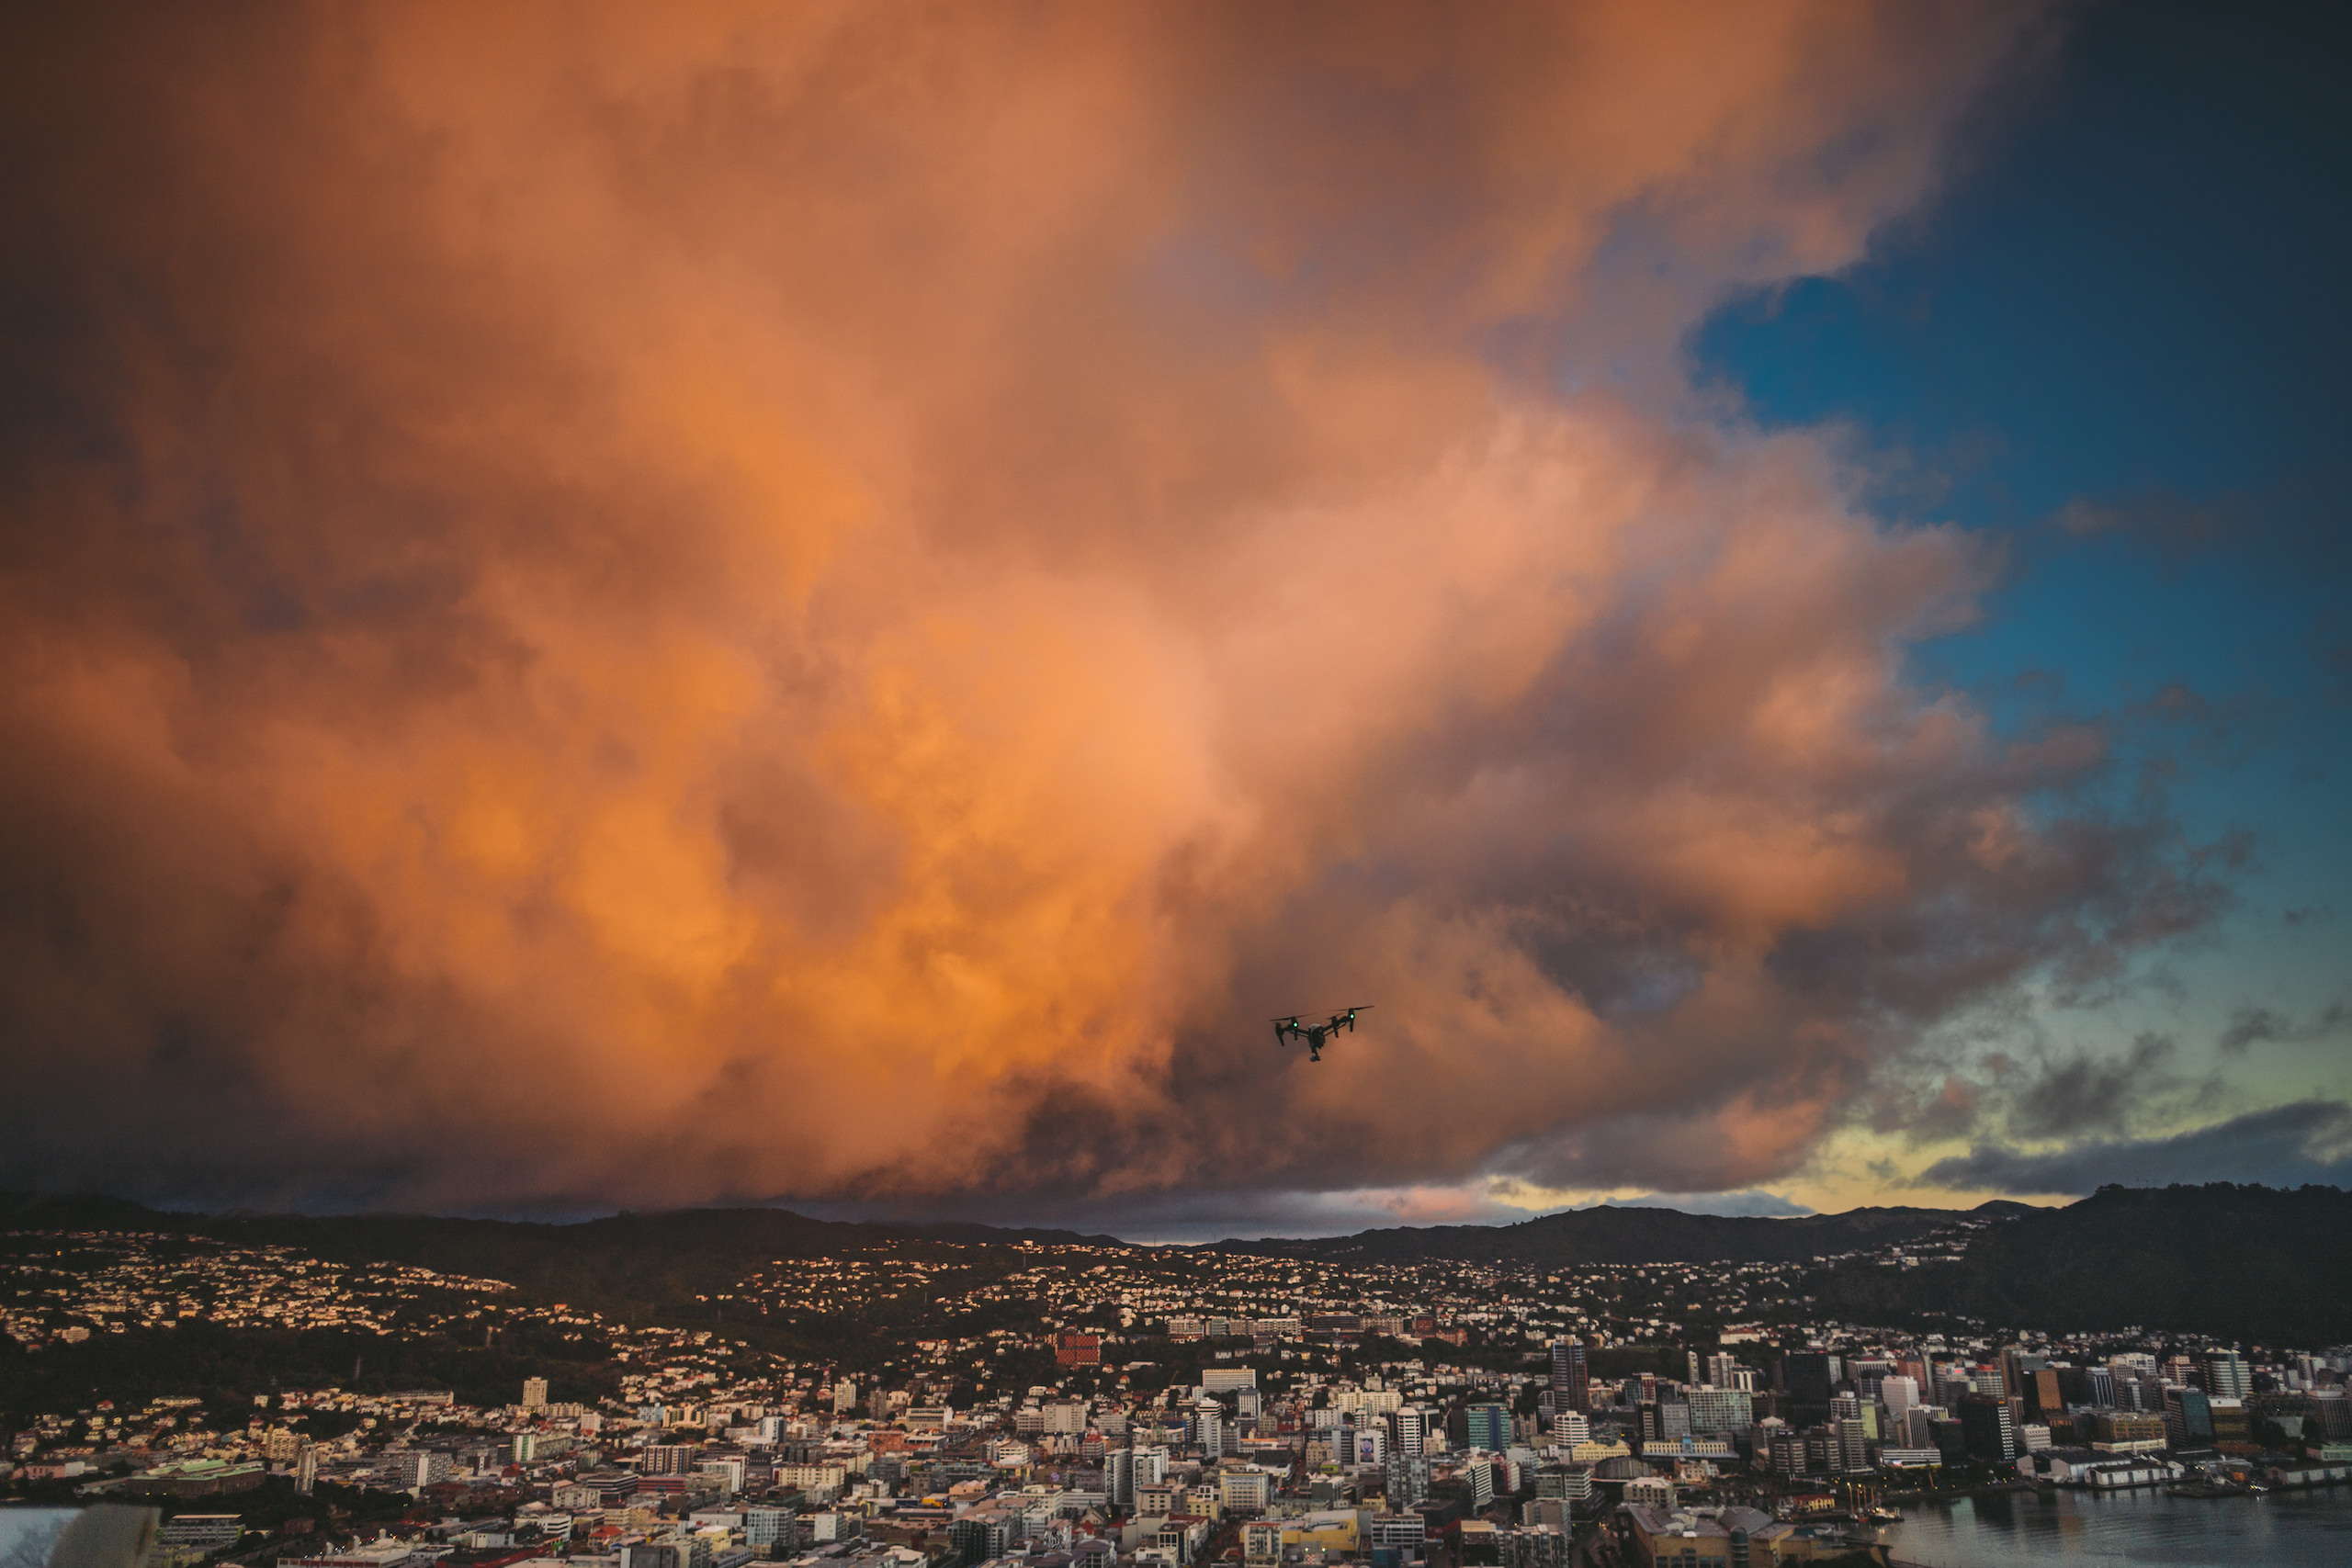 Drone in the sky over the valley with reddish clouds in the background